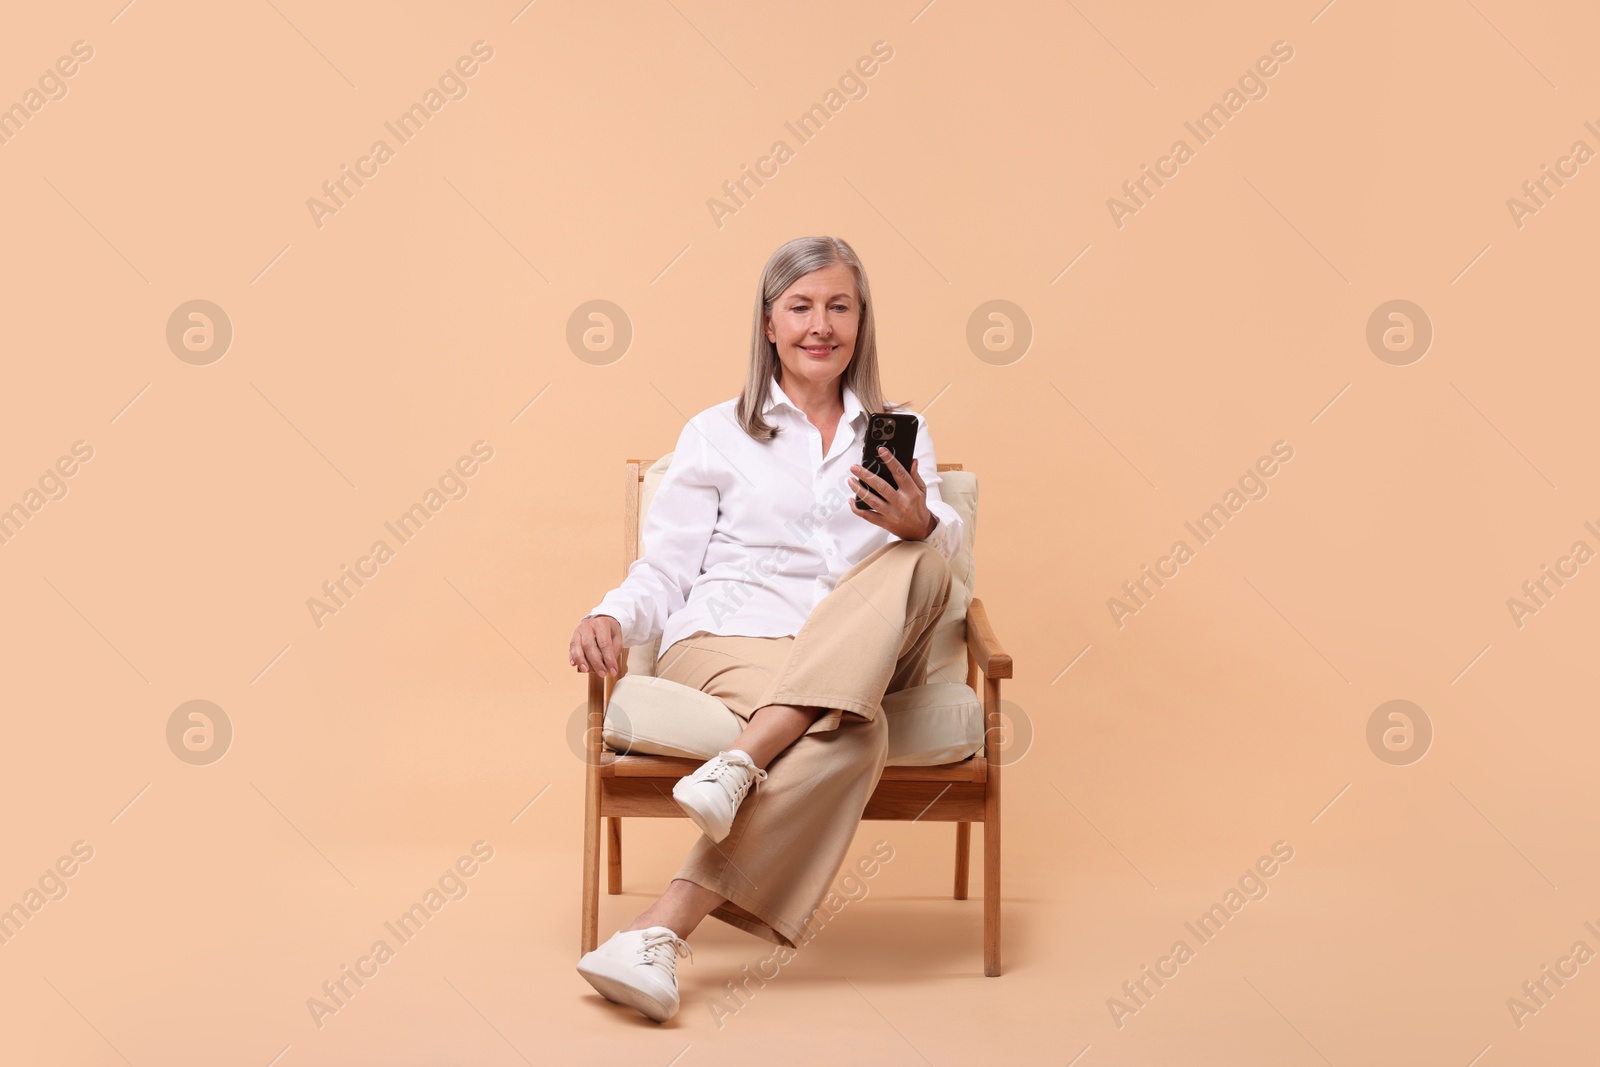 Photo of Senior woman with phone on armchair against beige background